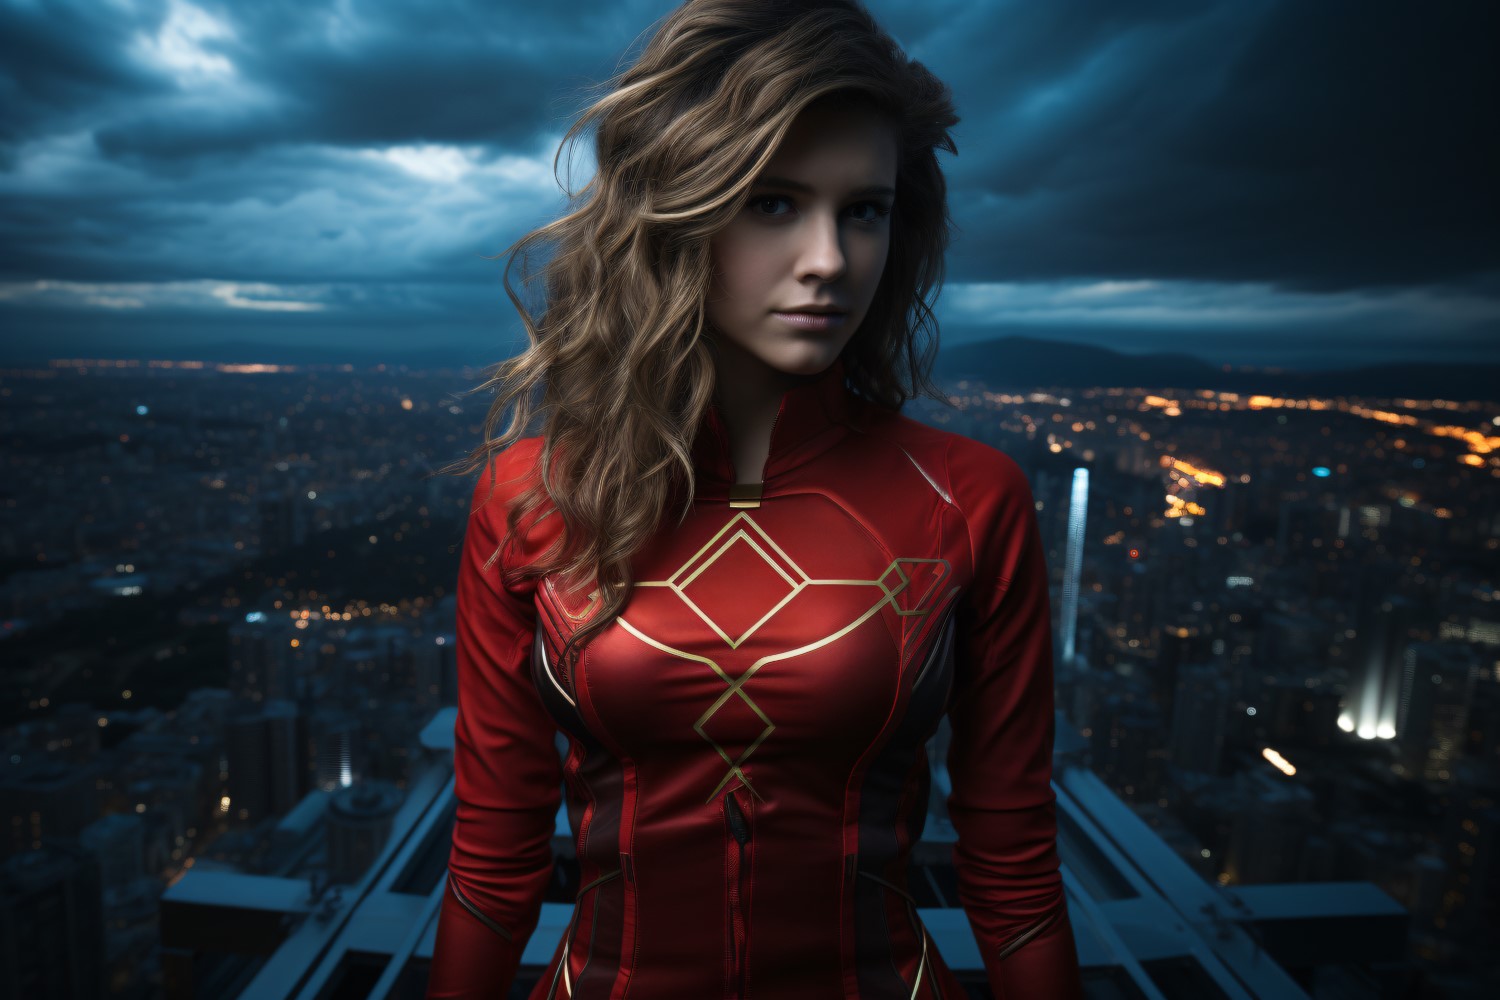 Young female superhero model standing on building urban area 25